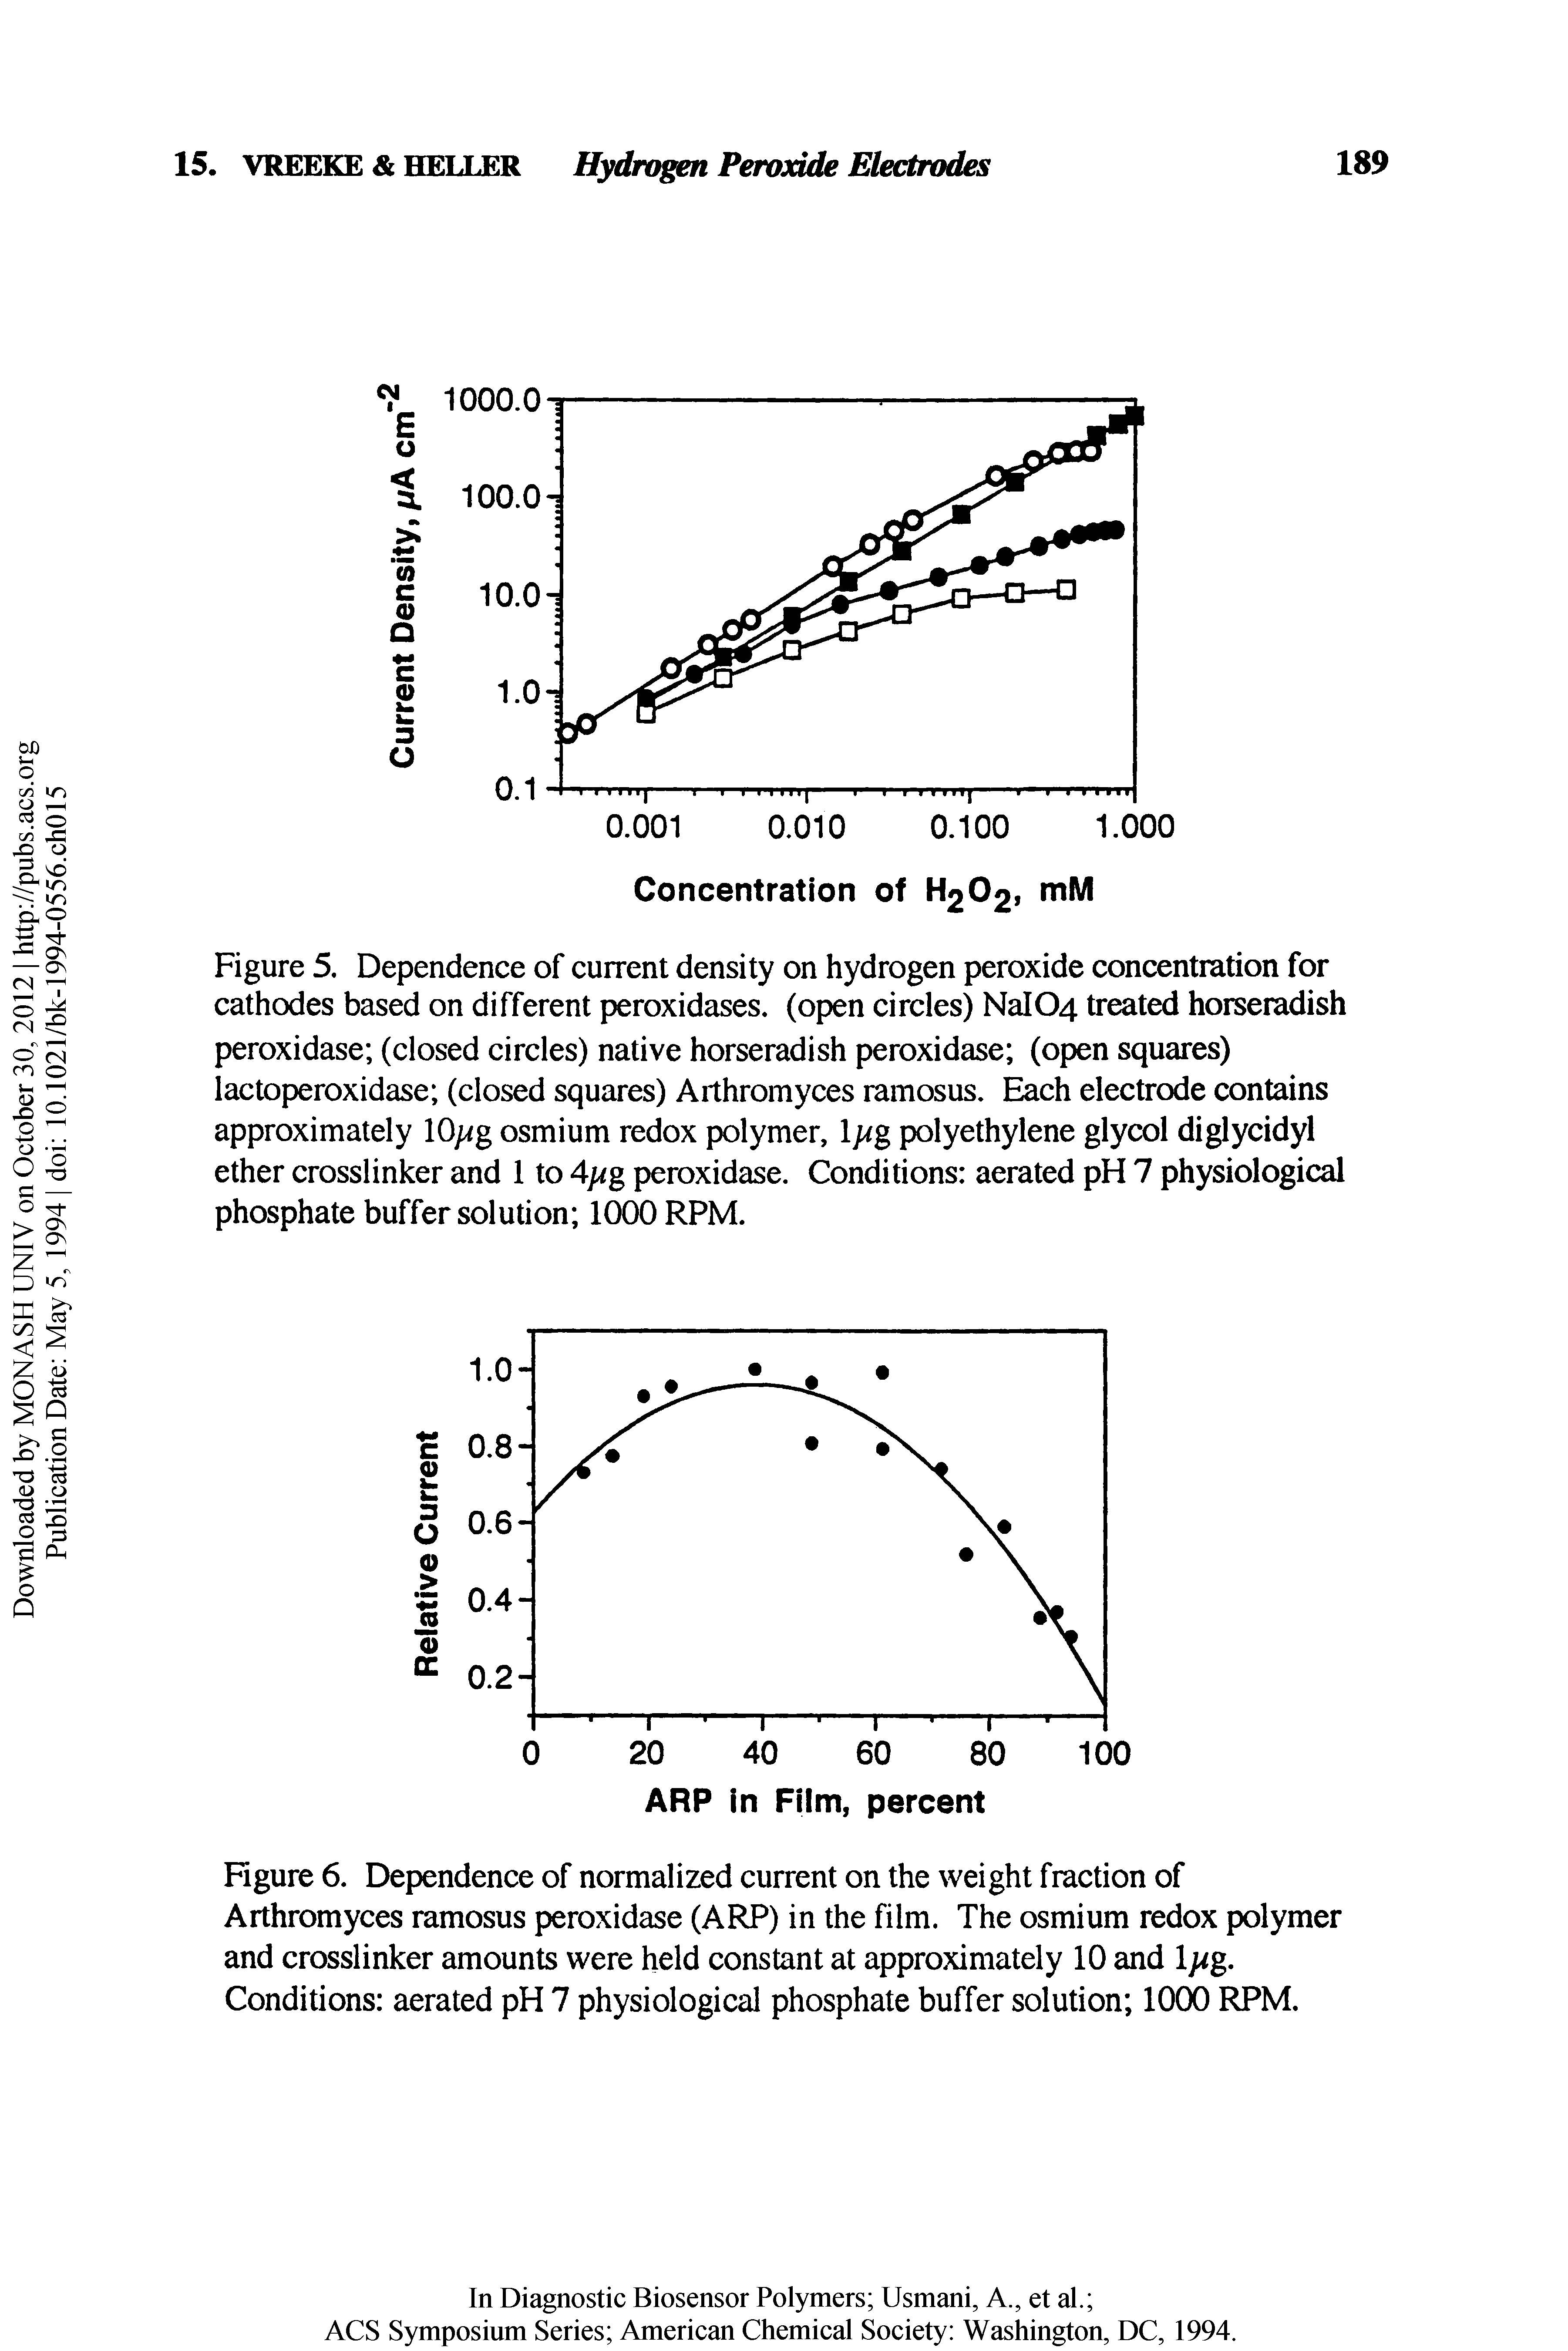 Figure 6. Dependence of normalized current on the weight fraction of Aithromyces ramosus peroxidase (ARP) in the film. The osmium redox polymer and crosslinker amounts were held constant at approximately 10 and l]4g. Conditions aerated pH 7 physiological phosphate buffer solution 1000 RPM.